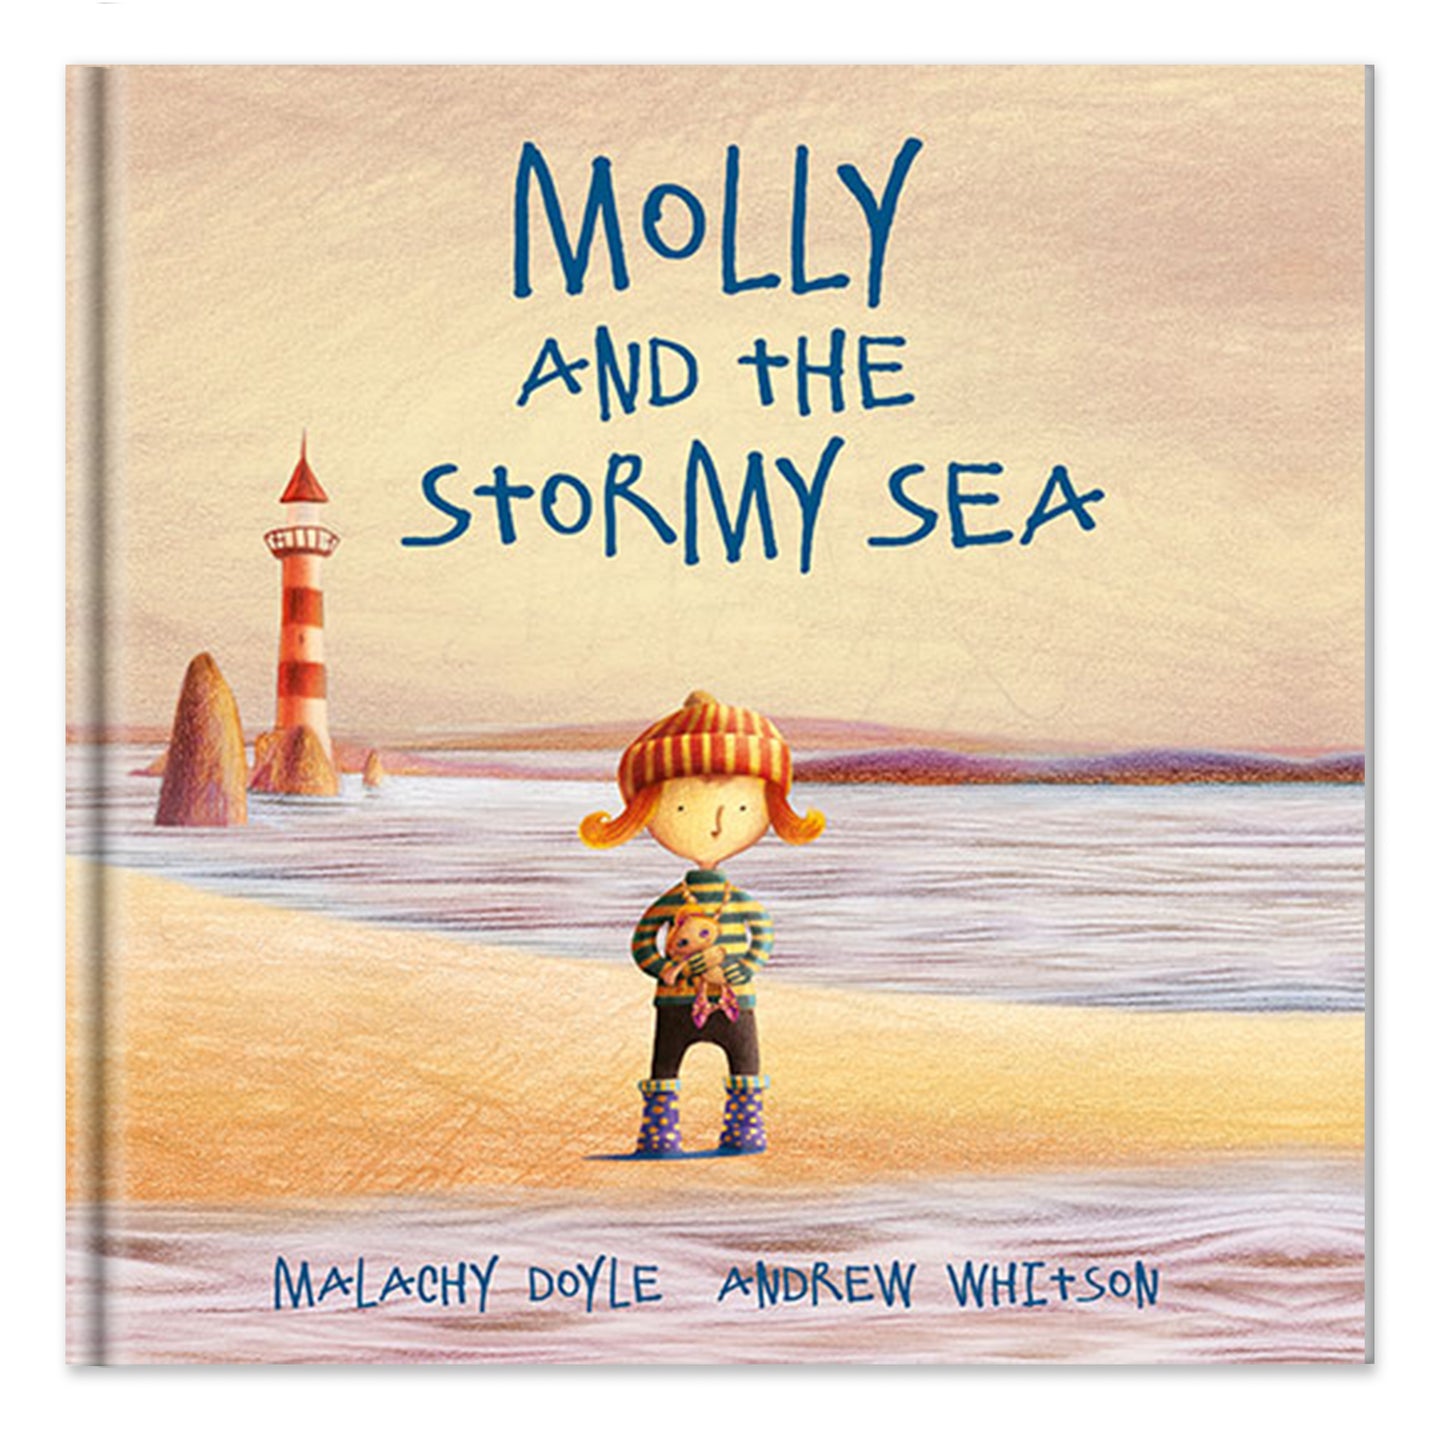 Molly and the Stormy Sea by Malachy Doyle and Andrew Whitson picture book cover